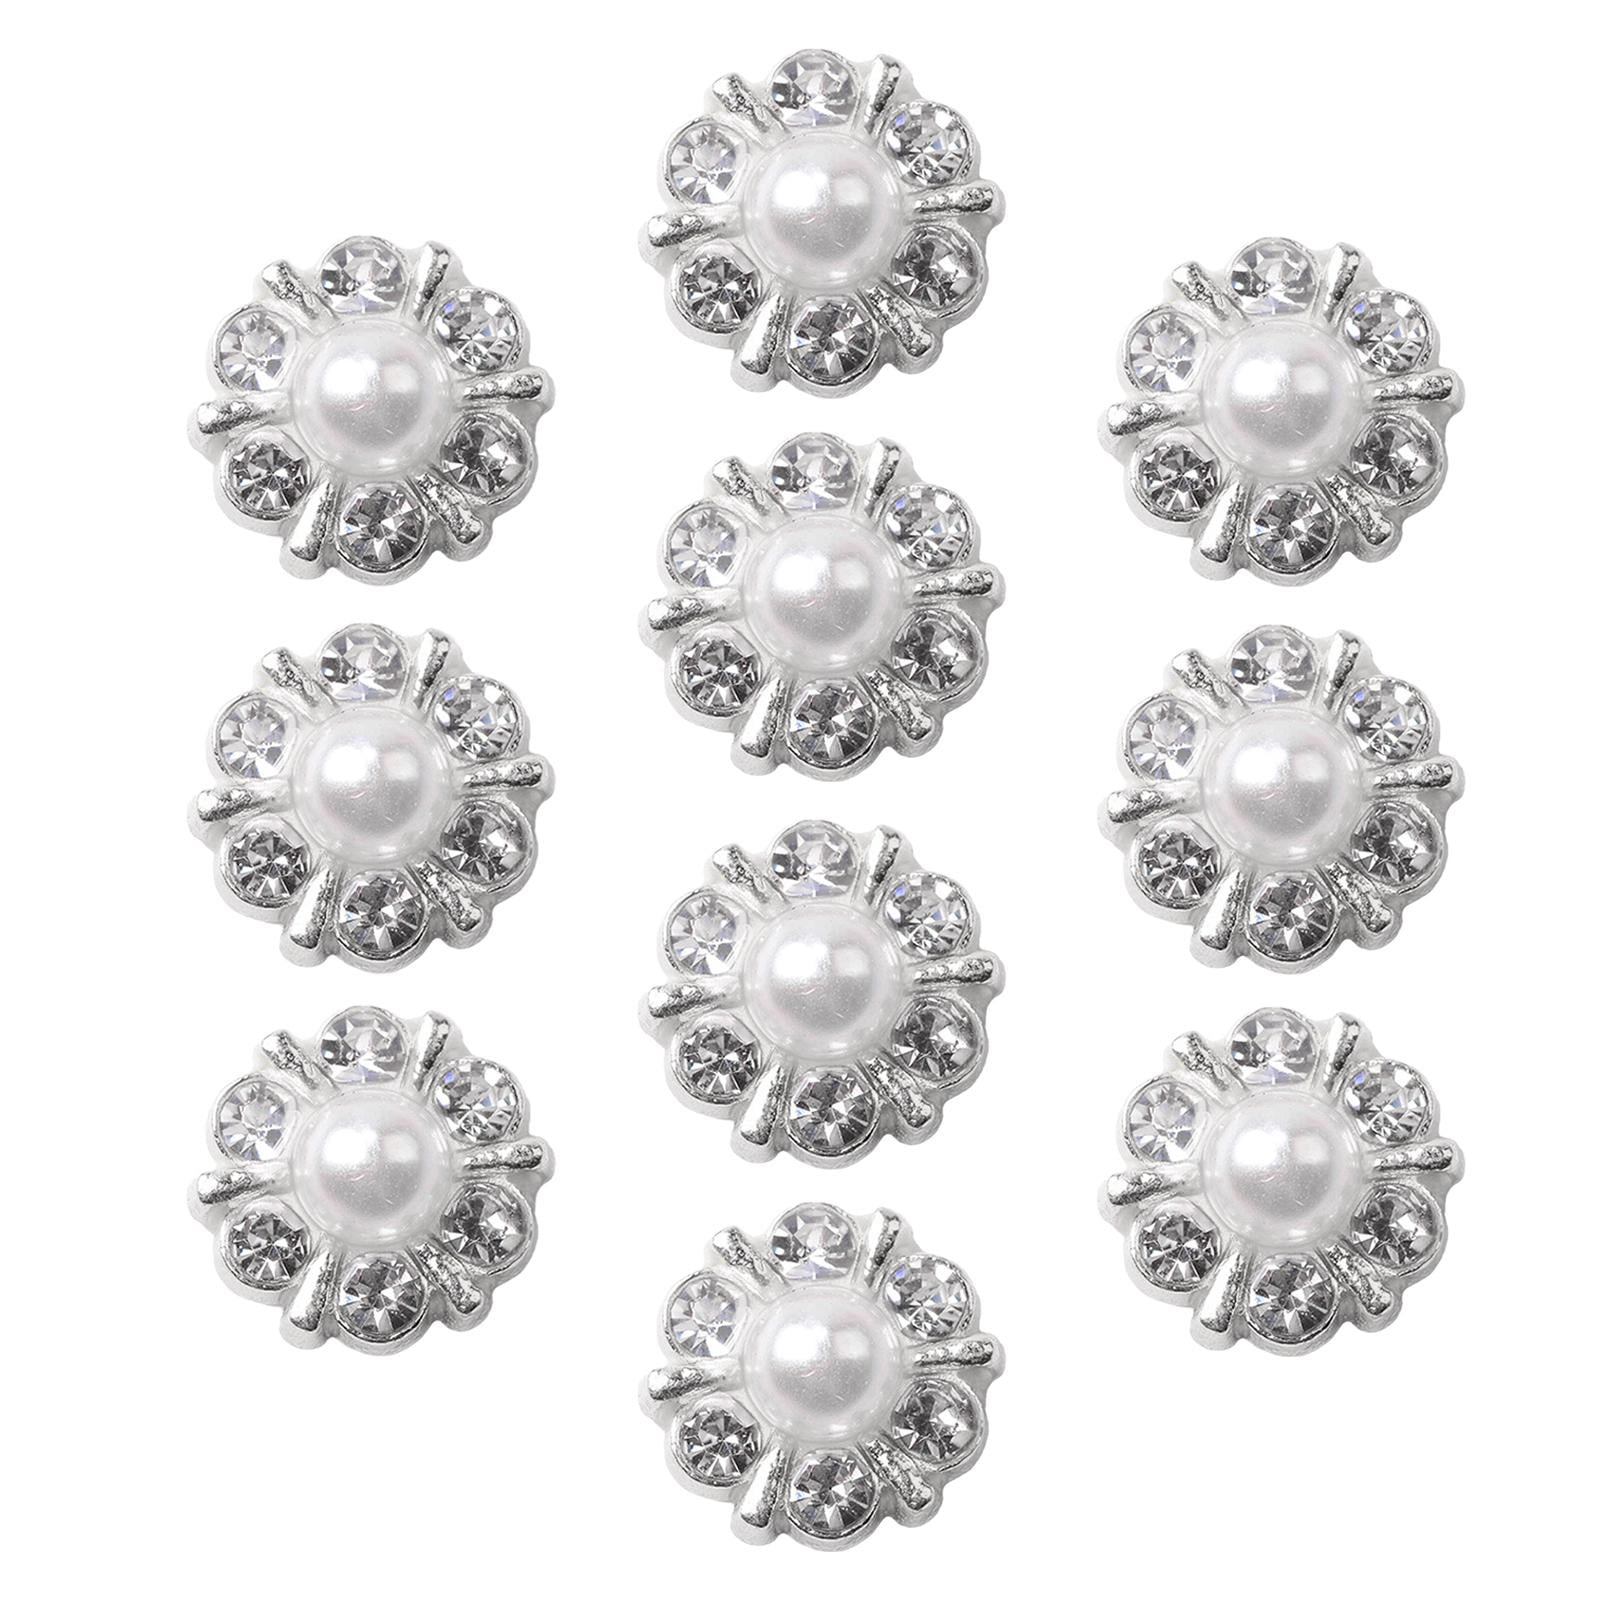 10 Pcs / 16mm / Silver Sew on Square Rhinestone Buttons, Silver Sew on  Crystal , Flower Centre, Wedding Crystal Diamante Embellishment S13S 